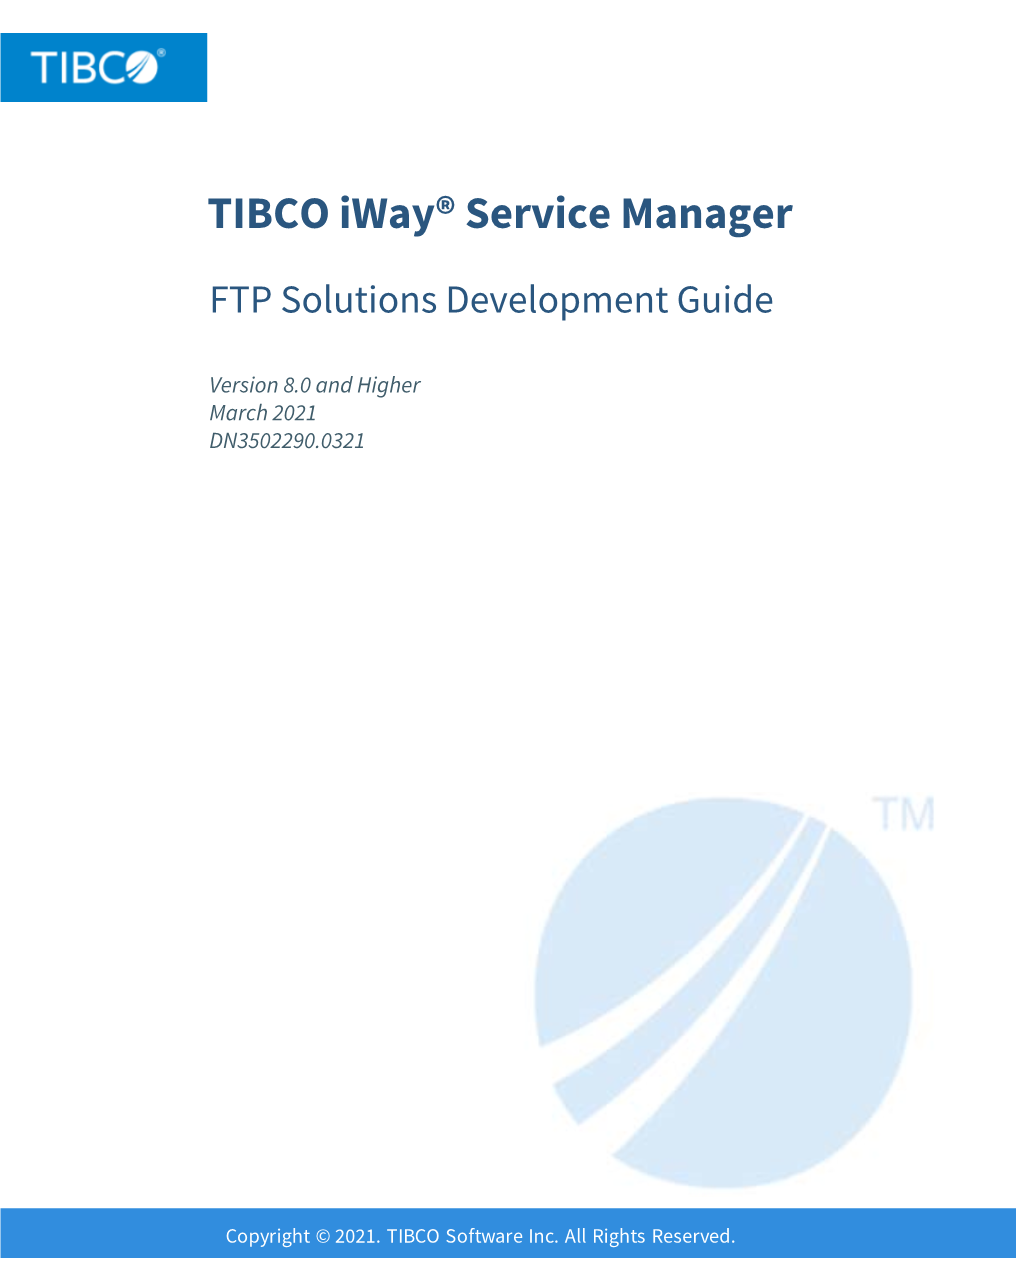 TIBCO Iway® Service Manager